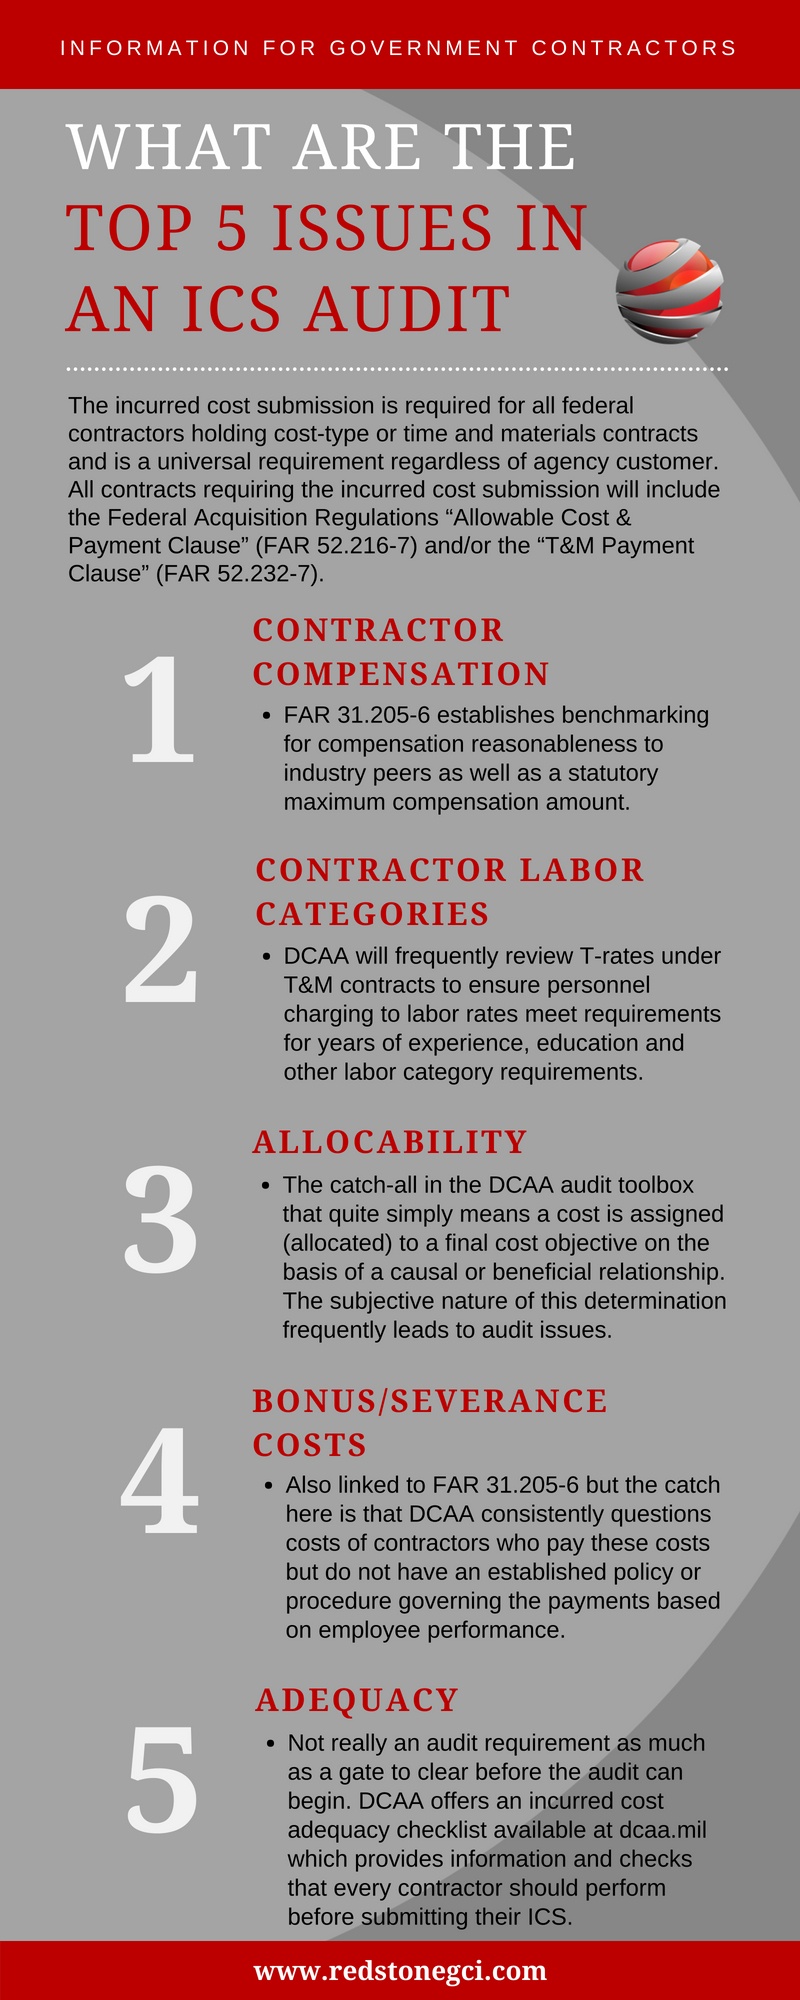 RGCI-What are the Top 5 Issues in an ICS Audit-Infographic